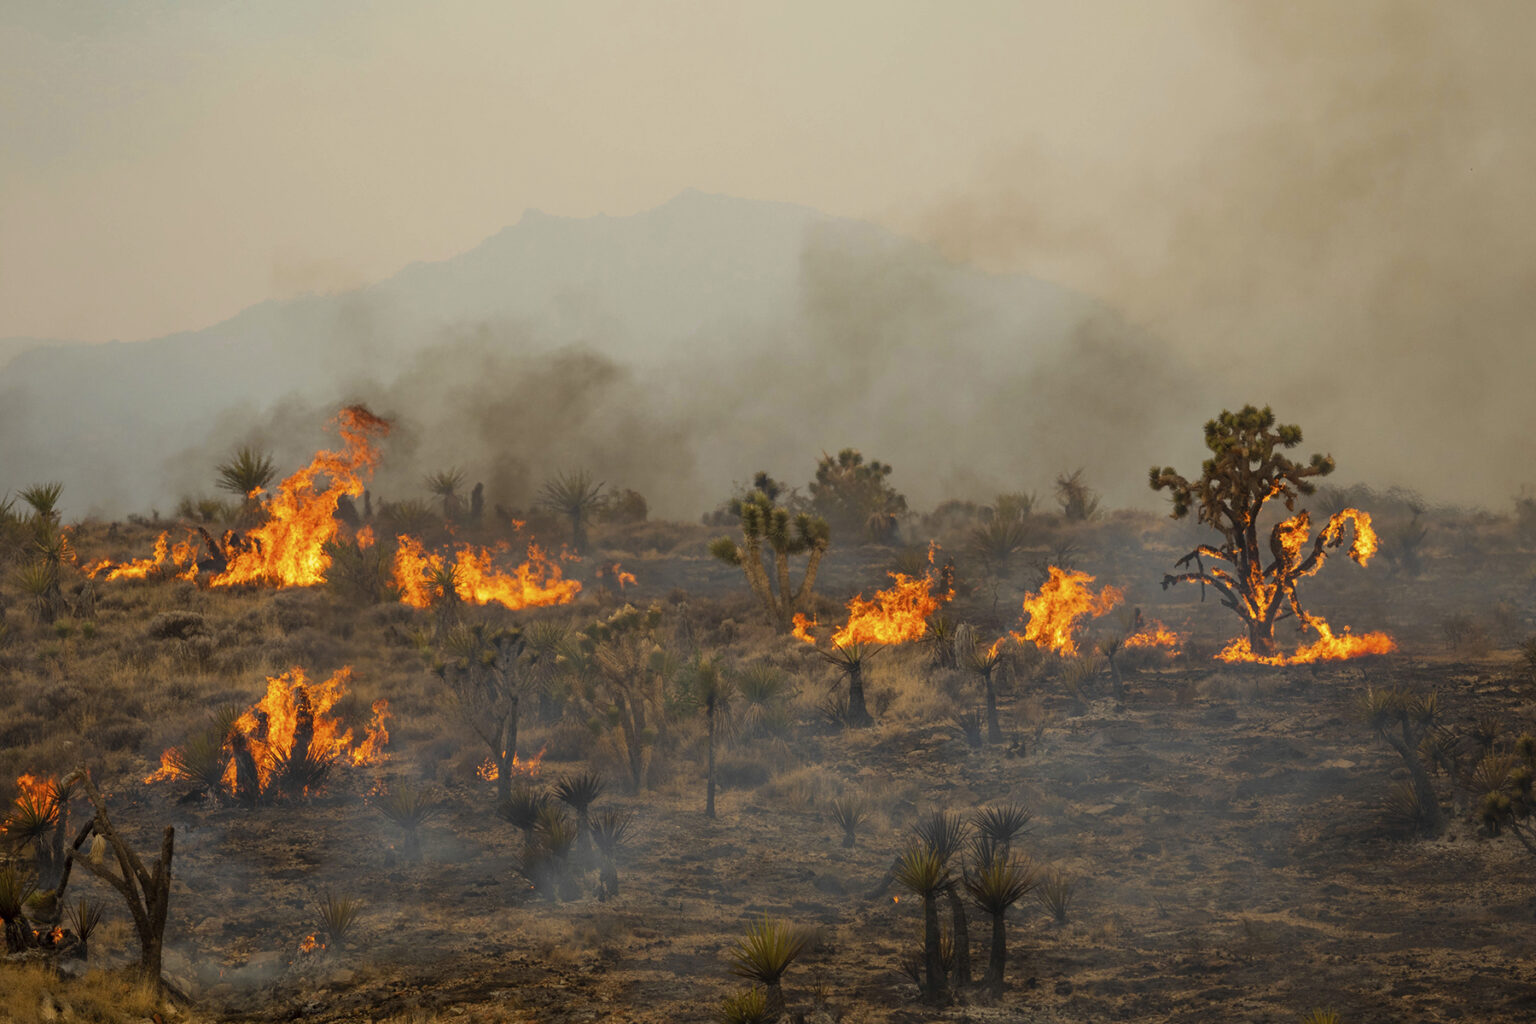 Joshua trees burn and smoke fills the area, obscuring a view of hills, during a wildfire